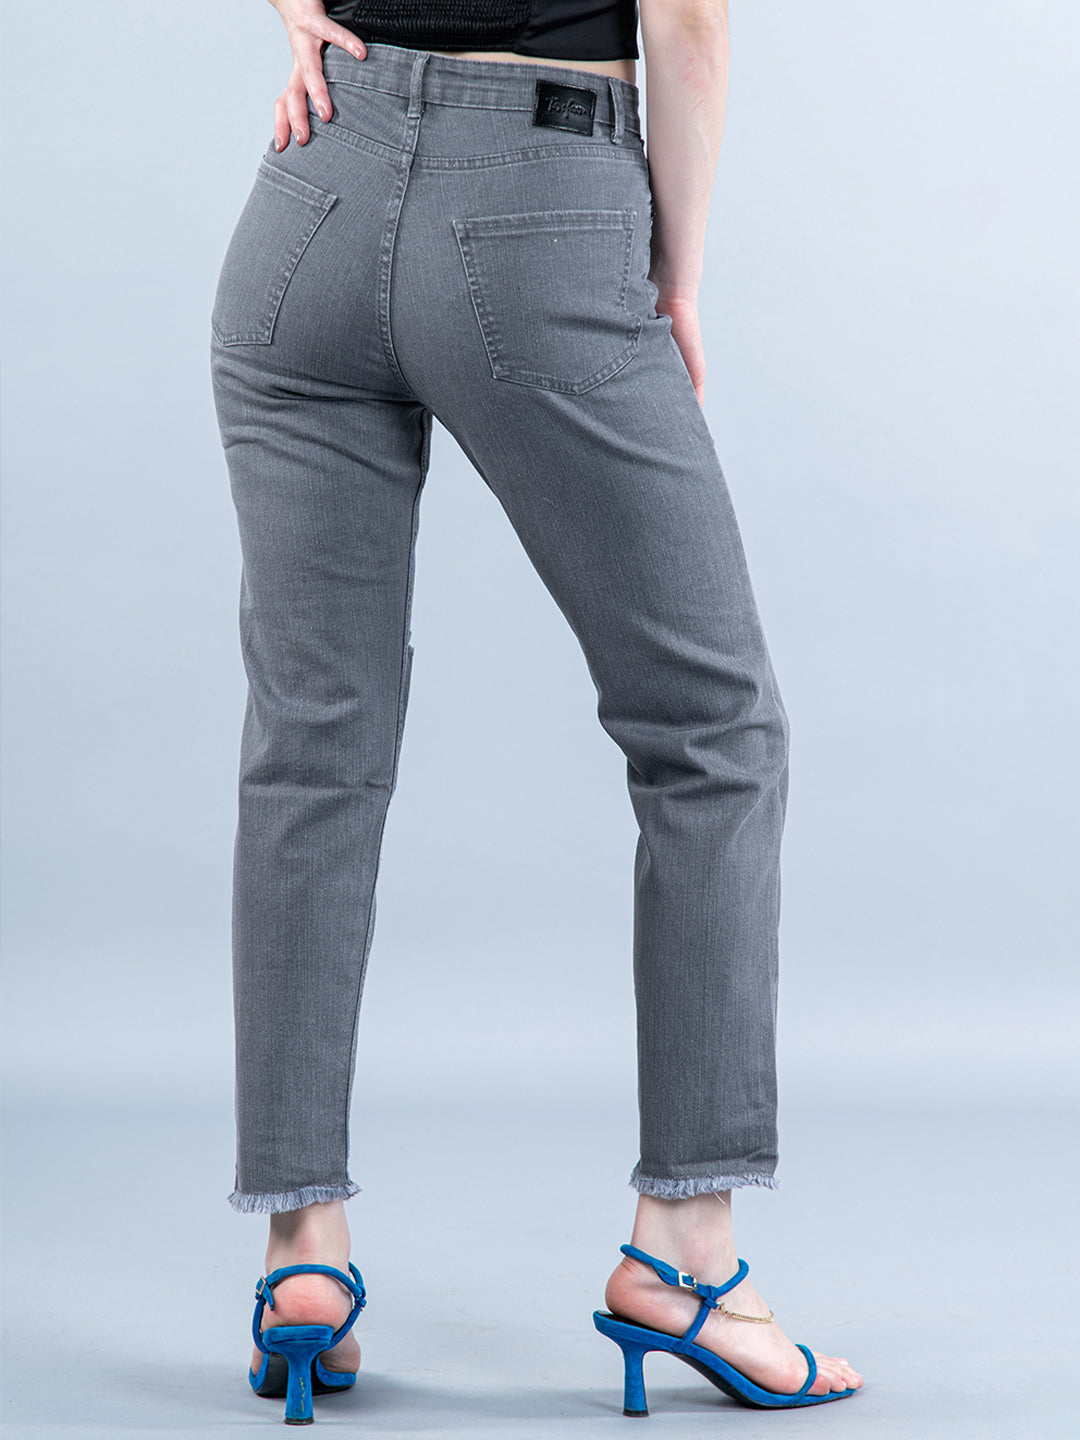 Blue Denim Joggers For Women at Rs 135/piece in Delhi | ID: 23754968588